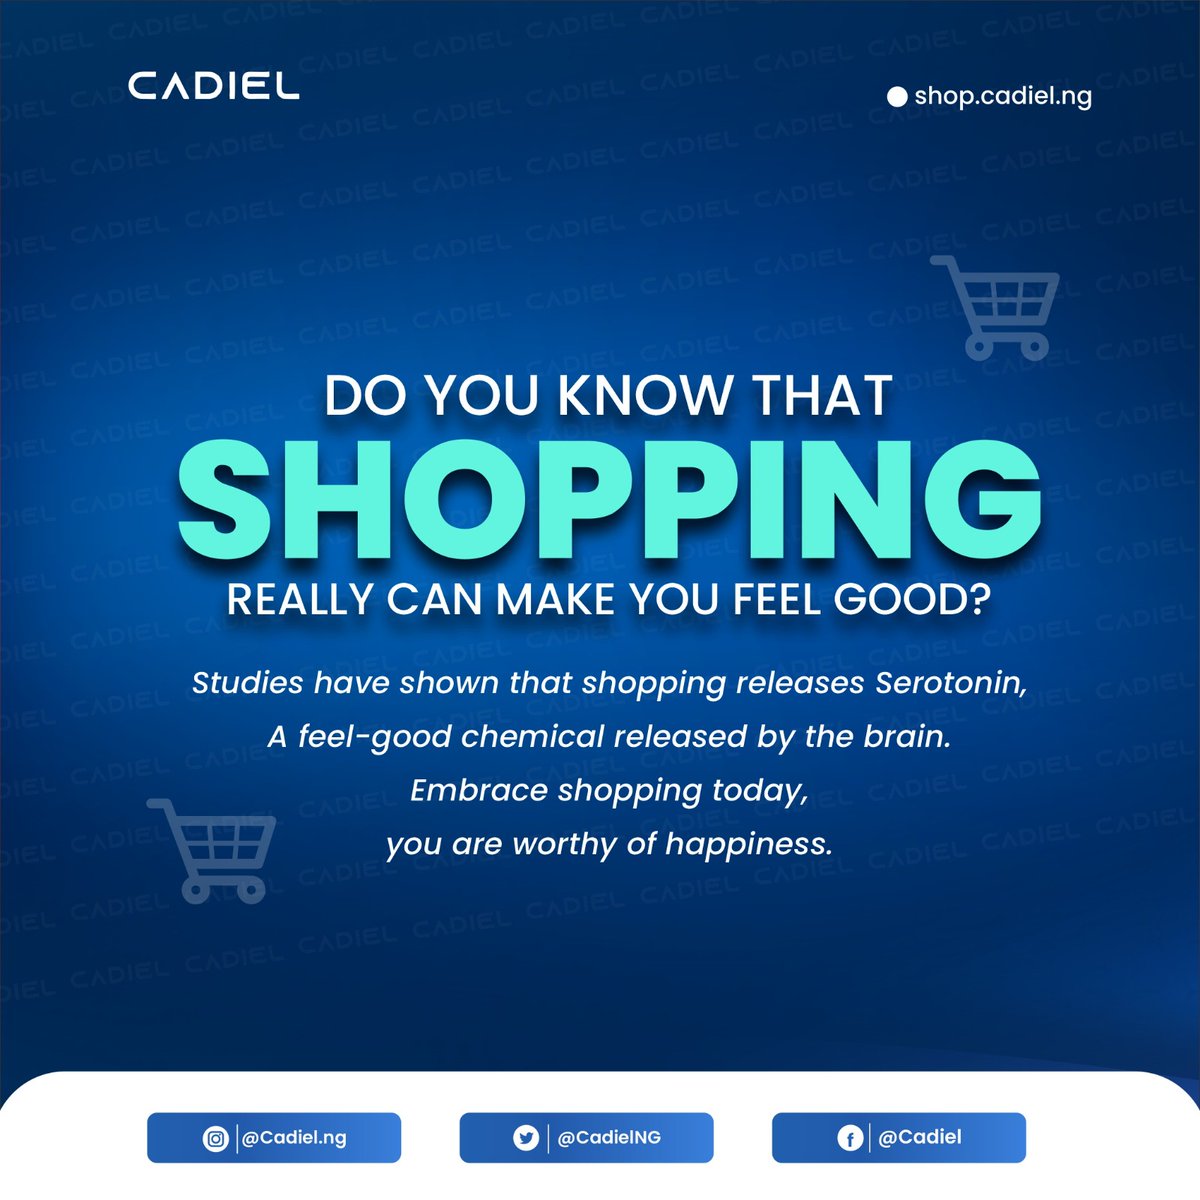 It's quite surprising how a seemingly trivial action like clicking on 'Add to Cart' can have a positive impact on your well-being. Who would have imagined?

Shop Now shop.cadiel.ng 
_____
CADIEL 
#BBNAllStars